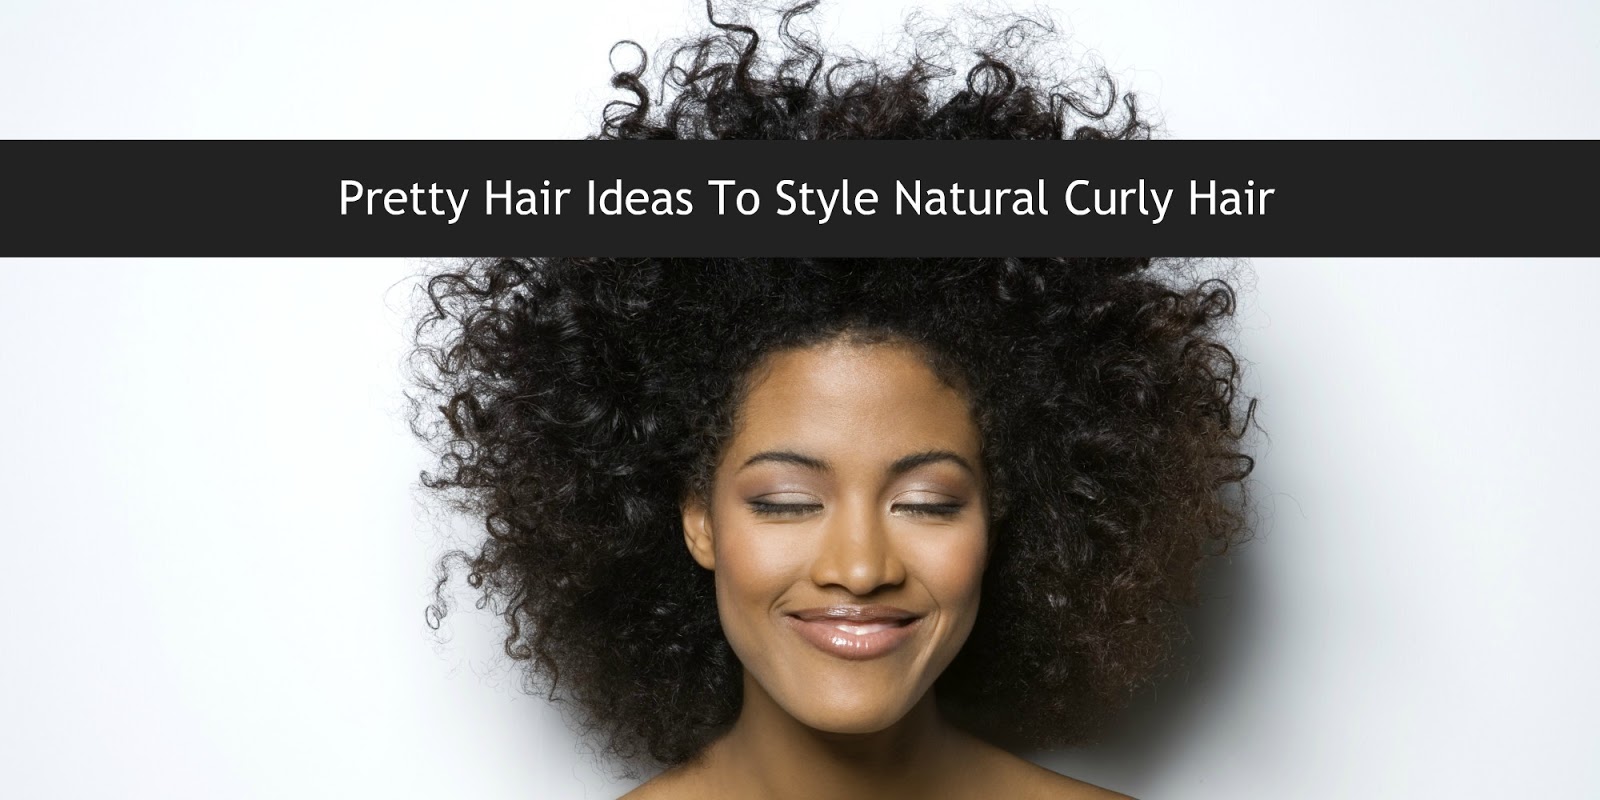 Pretty Hair Ideas To Style Natural Curly Hair | A Very Sweet Blog